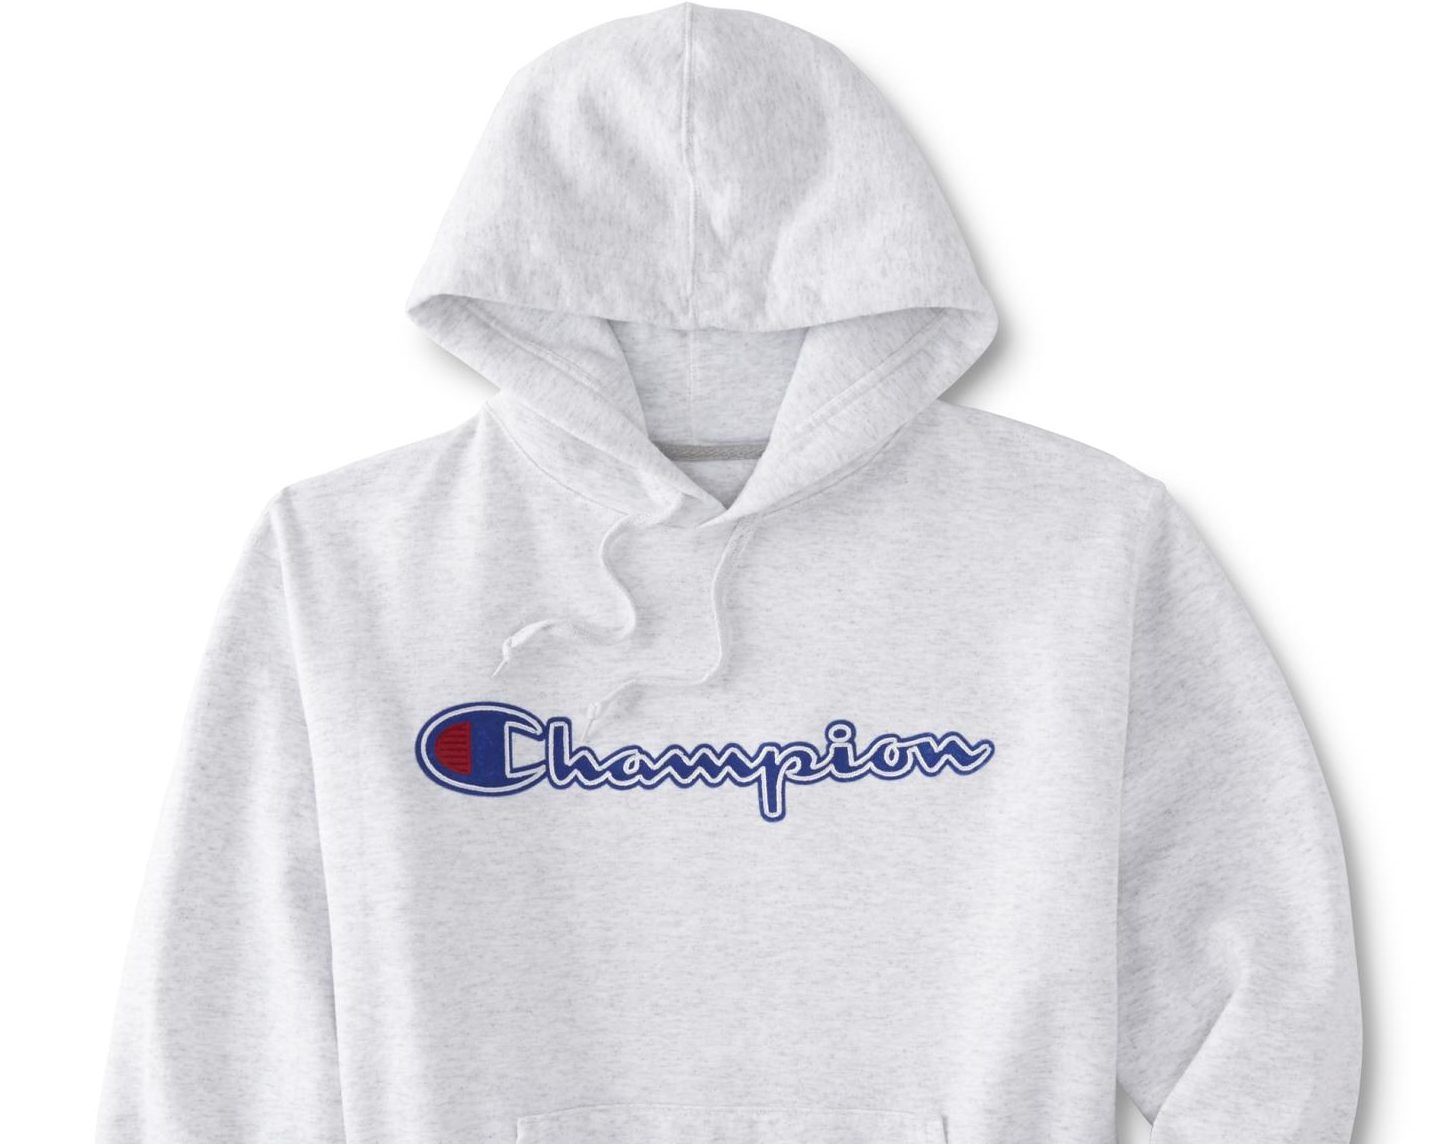 stores that sell champion clothing near me